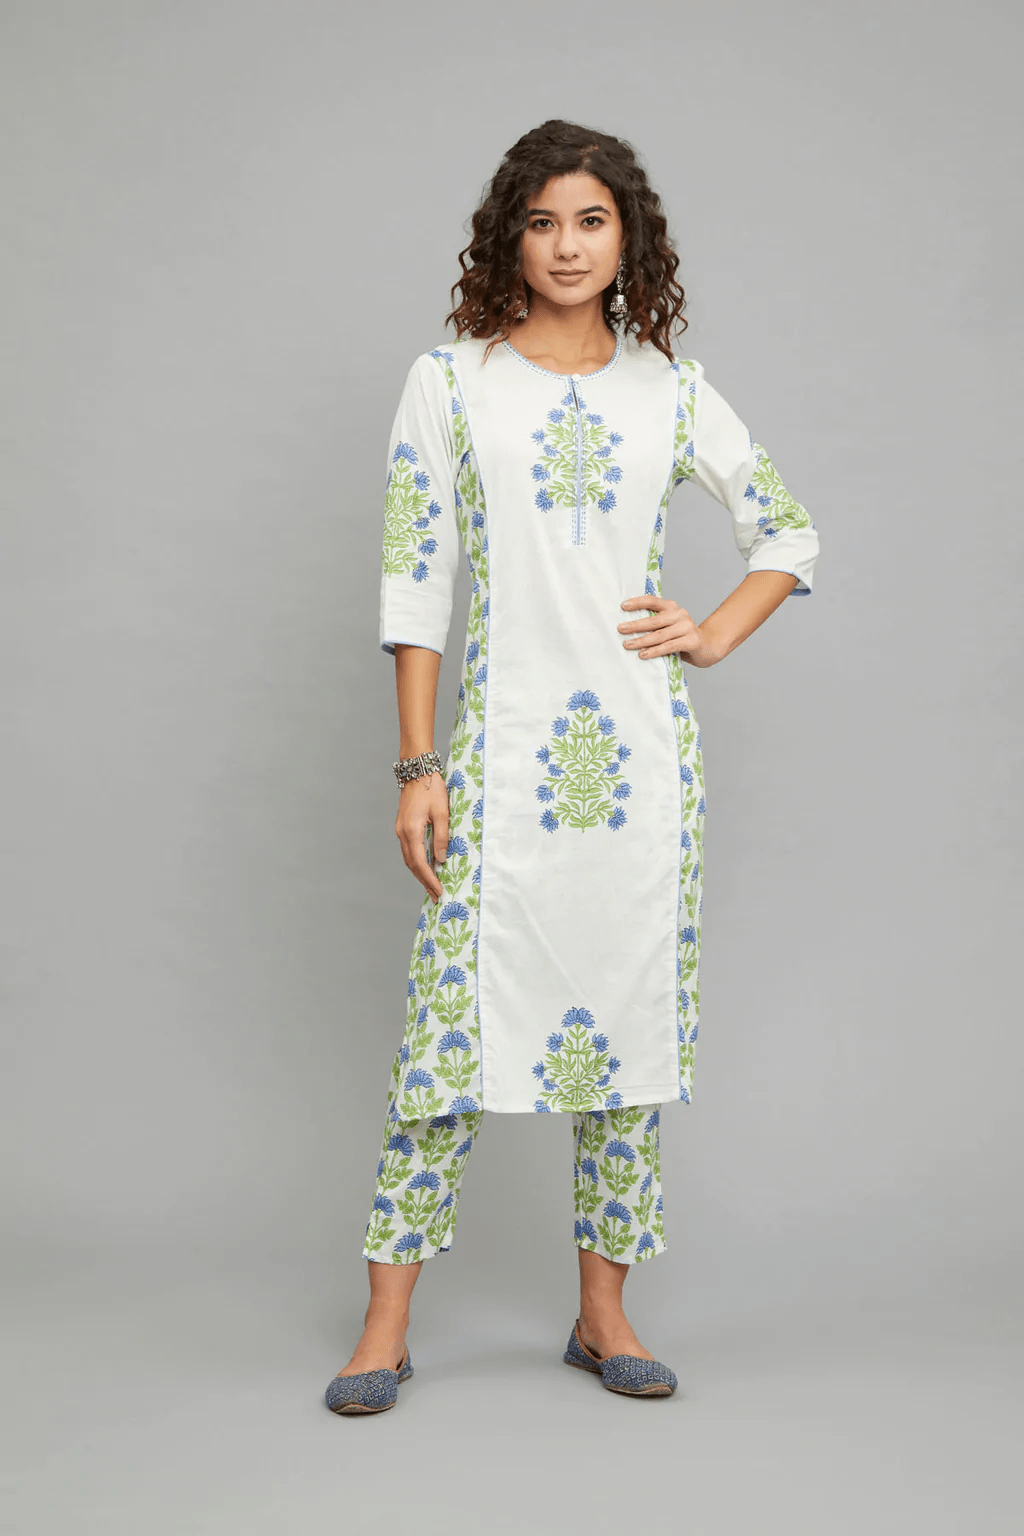 Buy HERE & NOW ) Women Blue & Off-White Printed A-Line Kurta at Amazon.in